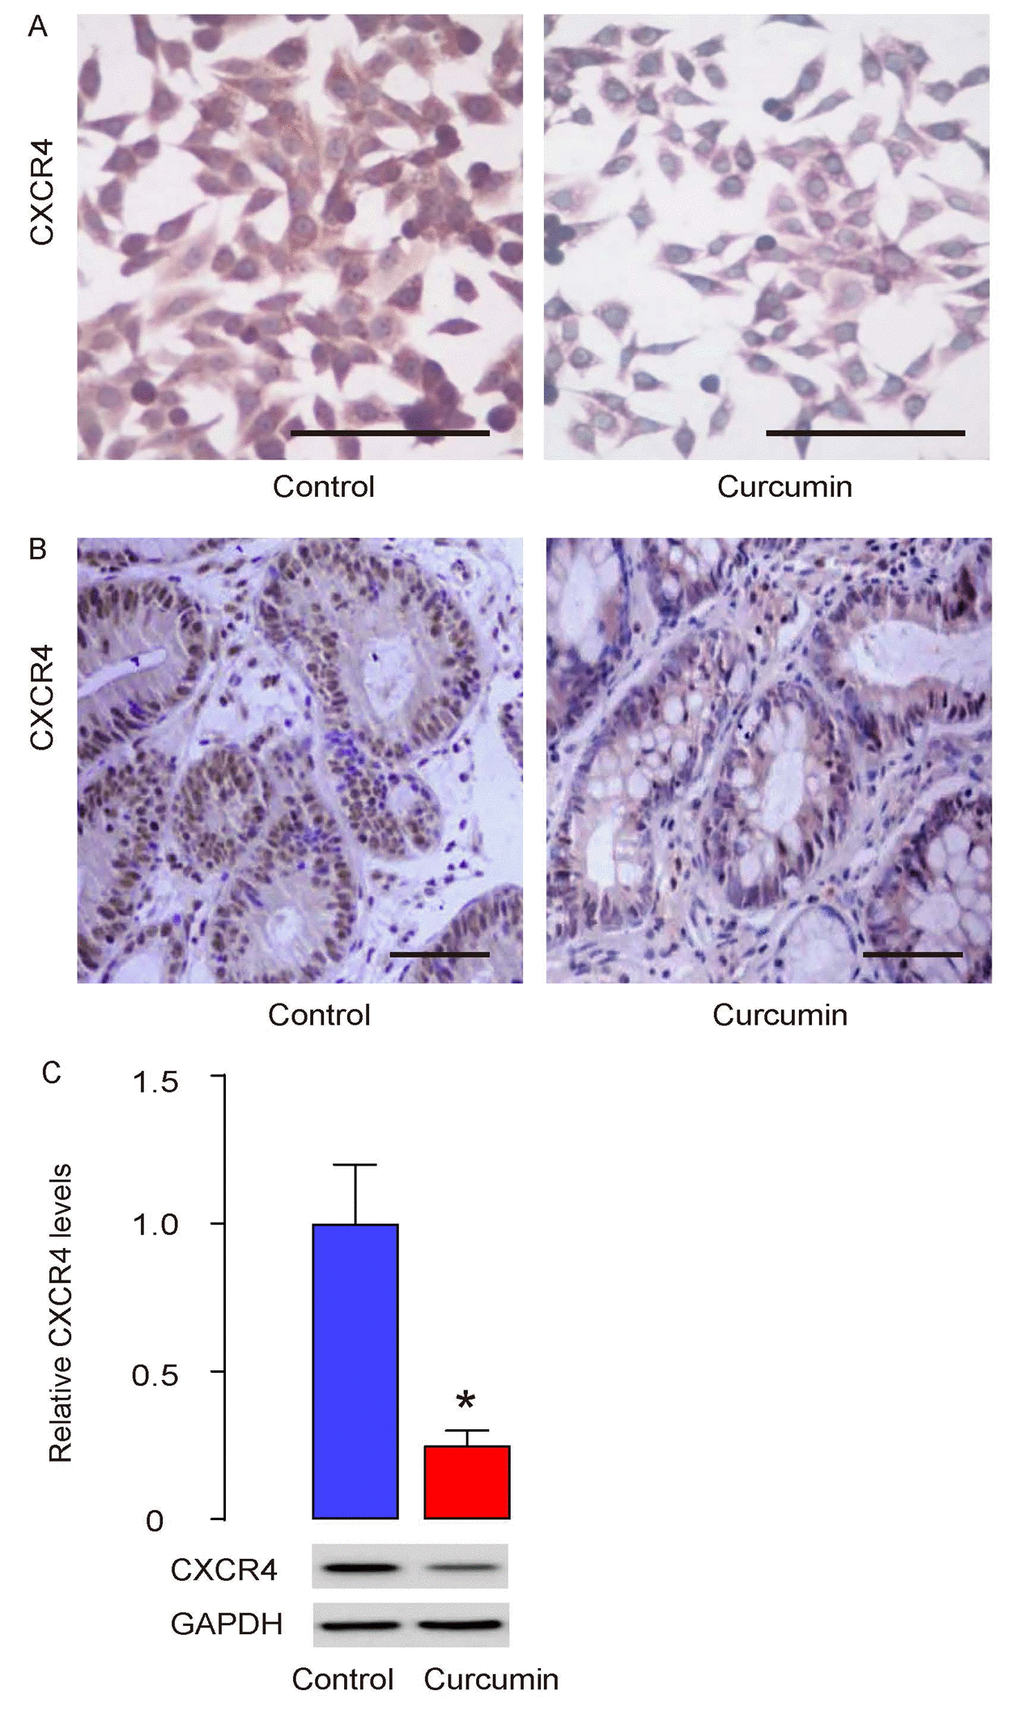 Curcumin inhibits liver metastasis of GC through CXCR4. (A) Cultured PGCs were treated with/without 0.5µmol/l Curcumin for 12 hours and then stained for CXCR4. (B) CXCR4 levels were also assessed in the formed tumor by s.c. PGC grafting in mice that had received Curcumin or control, by immunostaining (B), and by Western blotting (C). *p